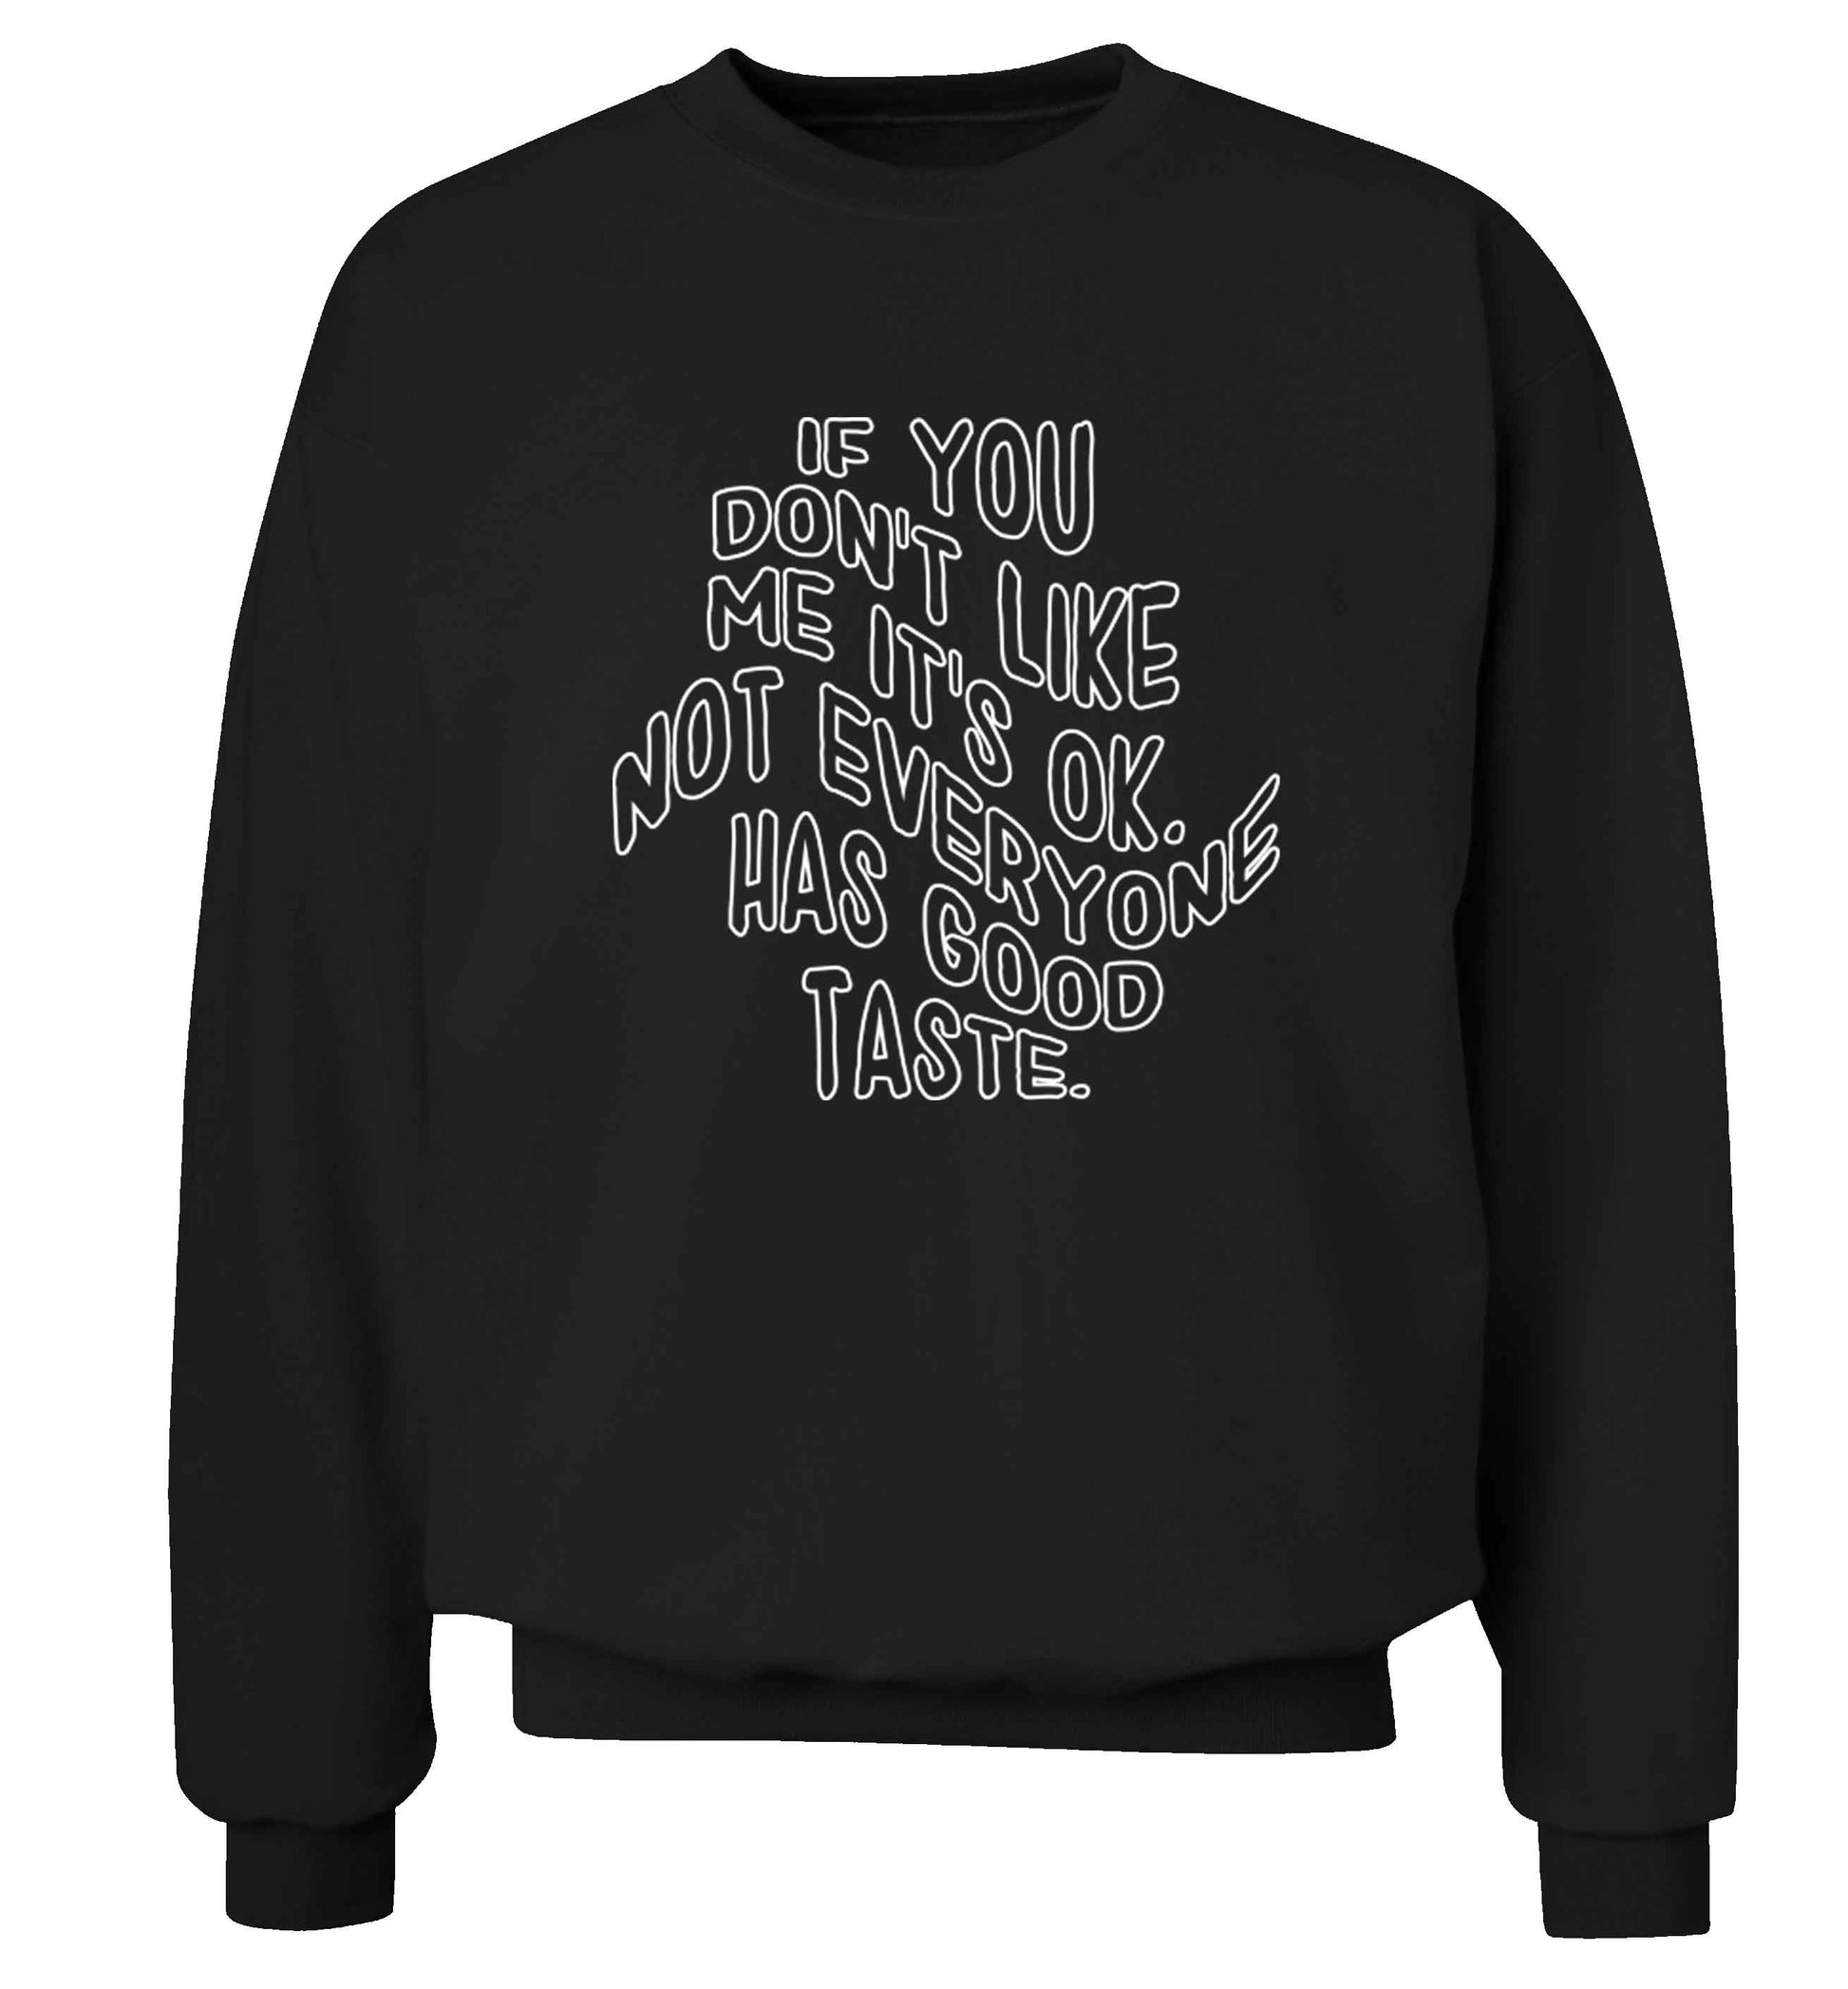 If you don't like me it's ok not everyone has good taste adult's unisex black sweater 2XL